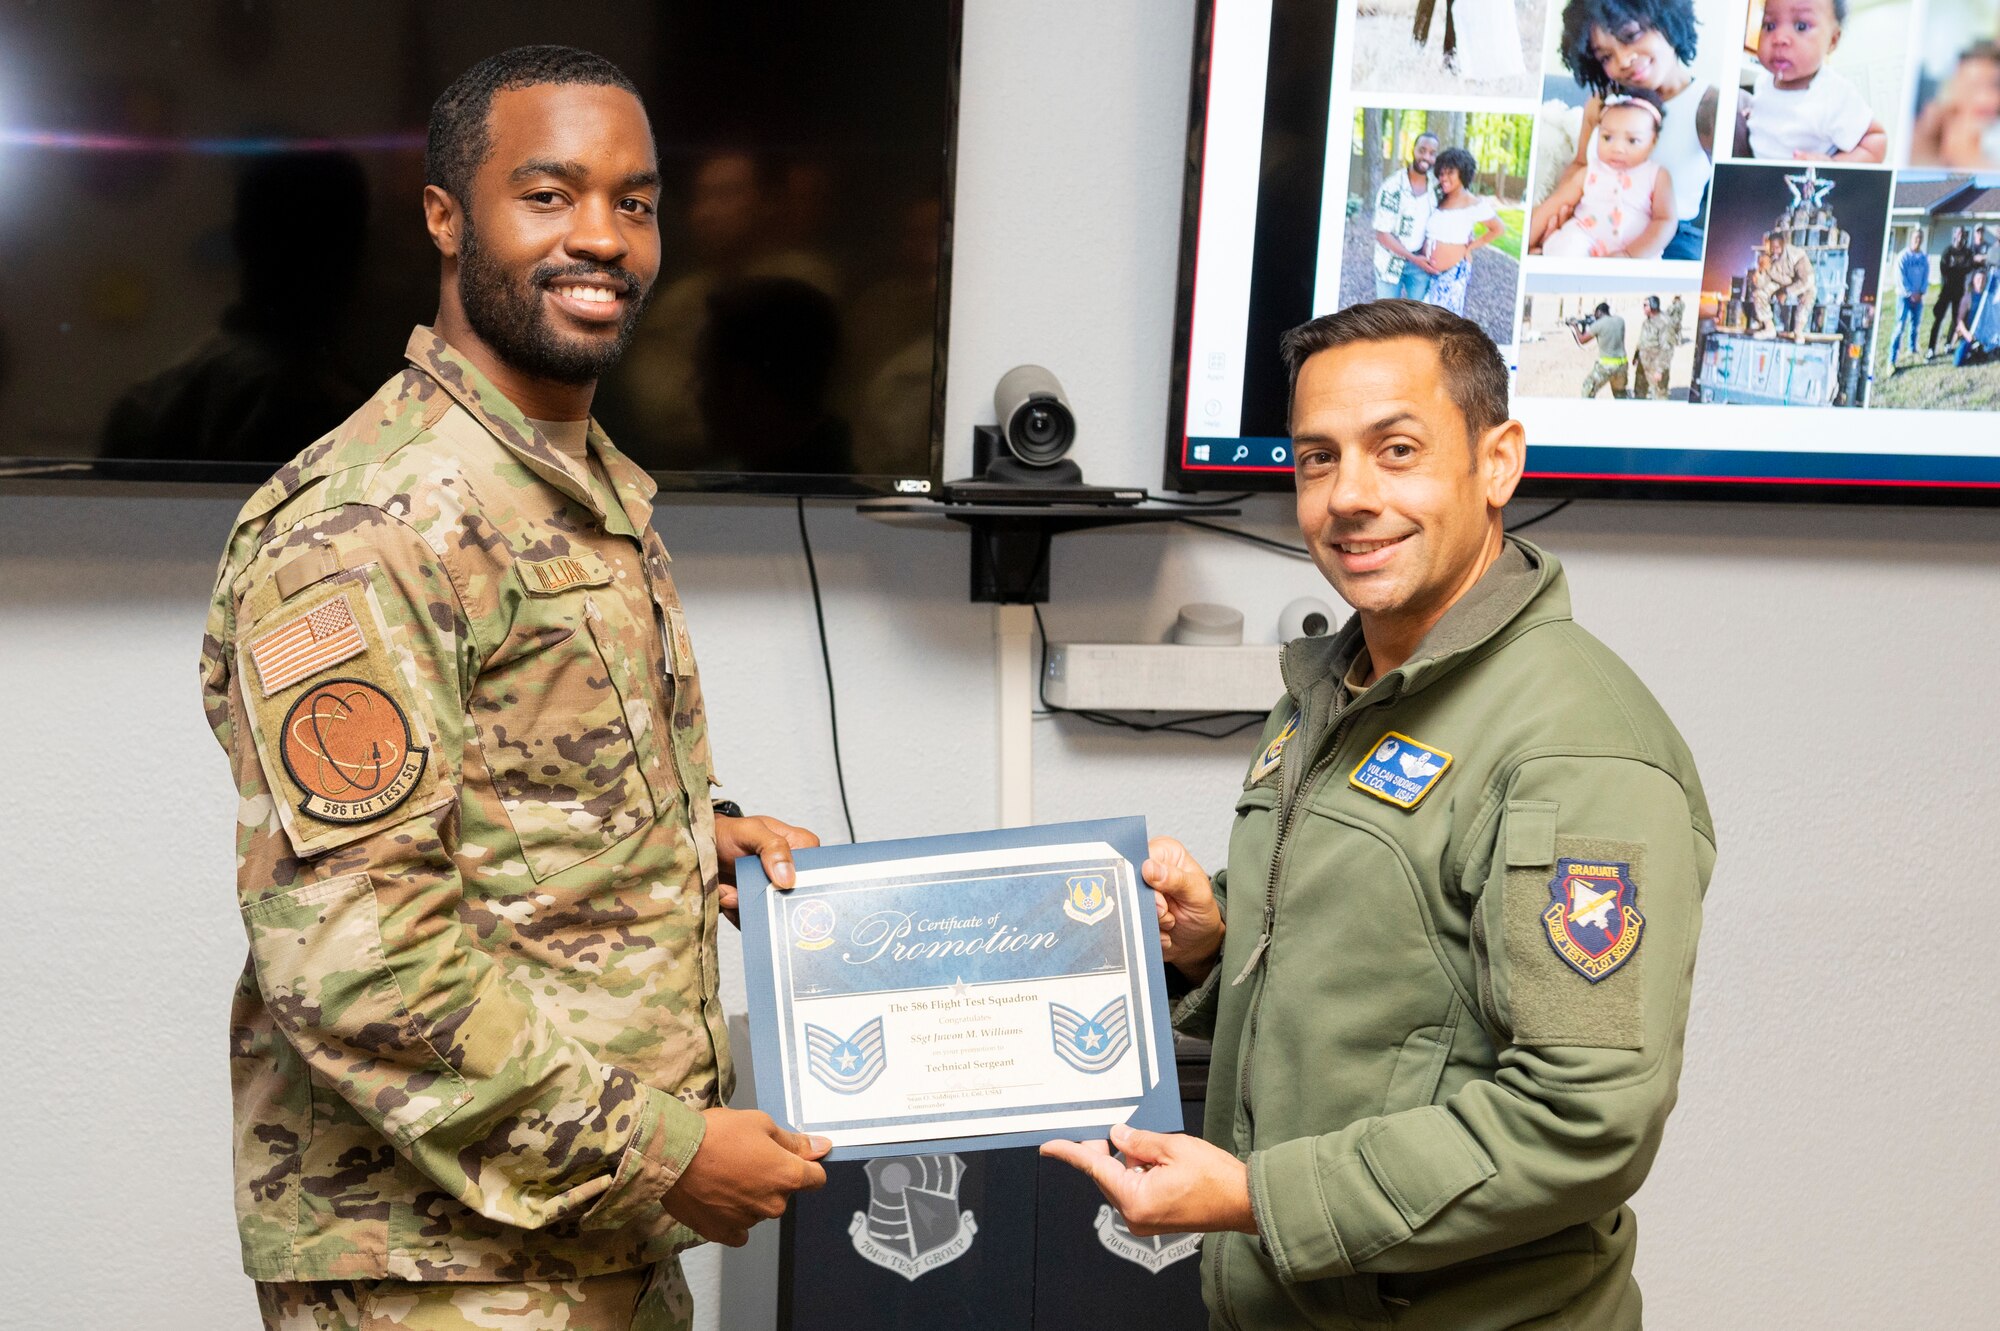 Newly-promoted Tech. Sgt. Juwon Williams, left, 586th Flight Test Squadron Munitions Systems noncommissioned officer in charge, poses with U.S. Air Force Lt. Col. Sean Siddiqui, 586th FLTS commander, after a surprise promotion at Holloman Air Force Base, New Mexico, Nov. 15, 2022